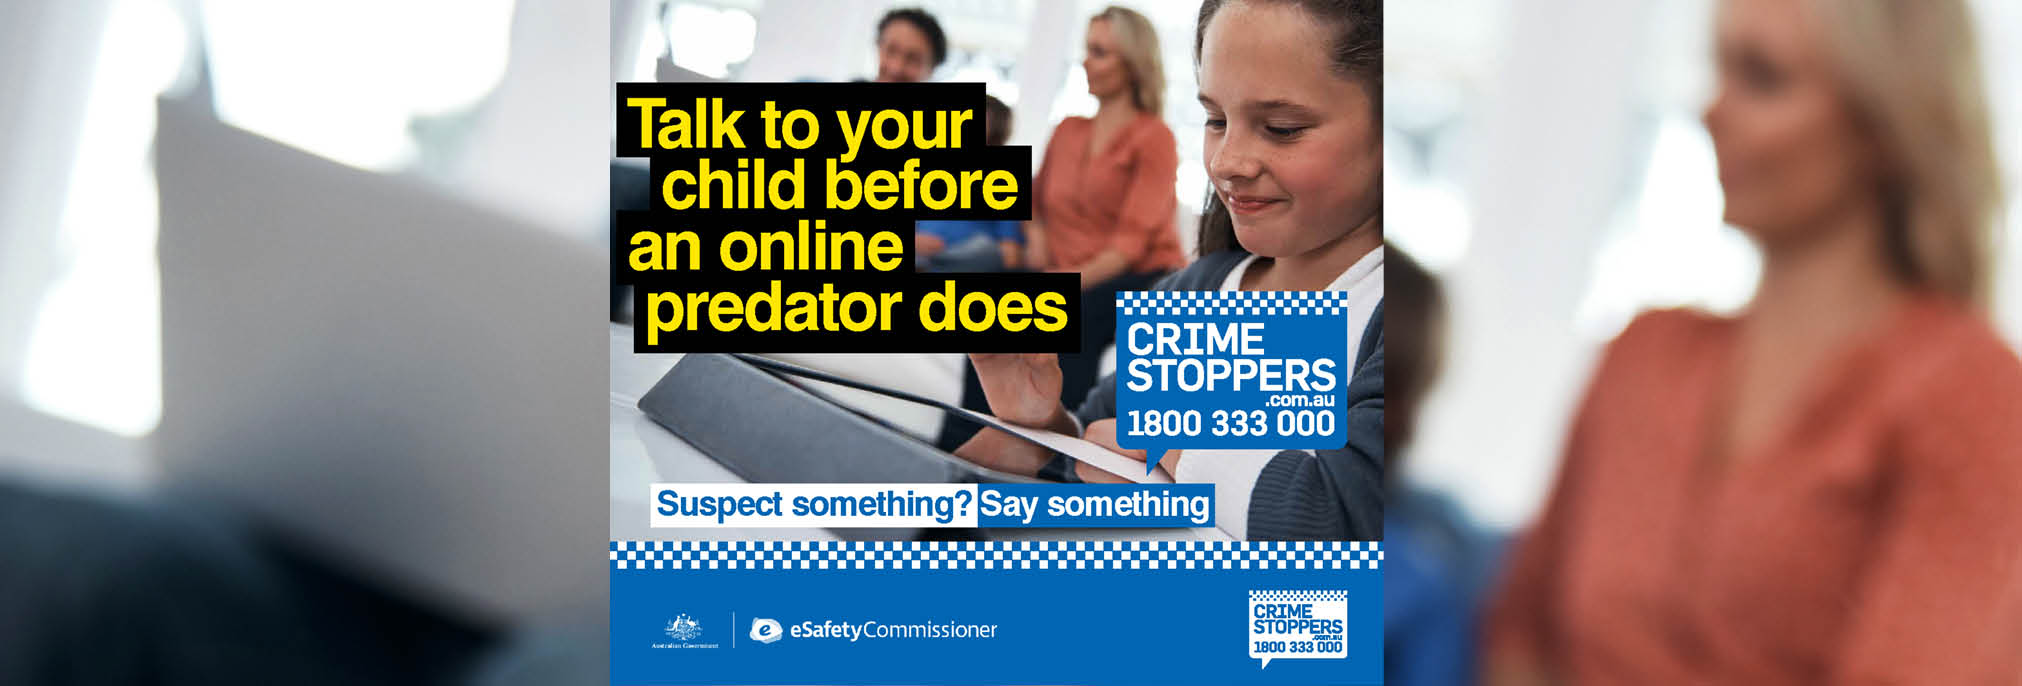 Talk to your child before an online predator does